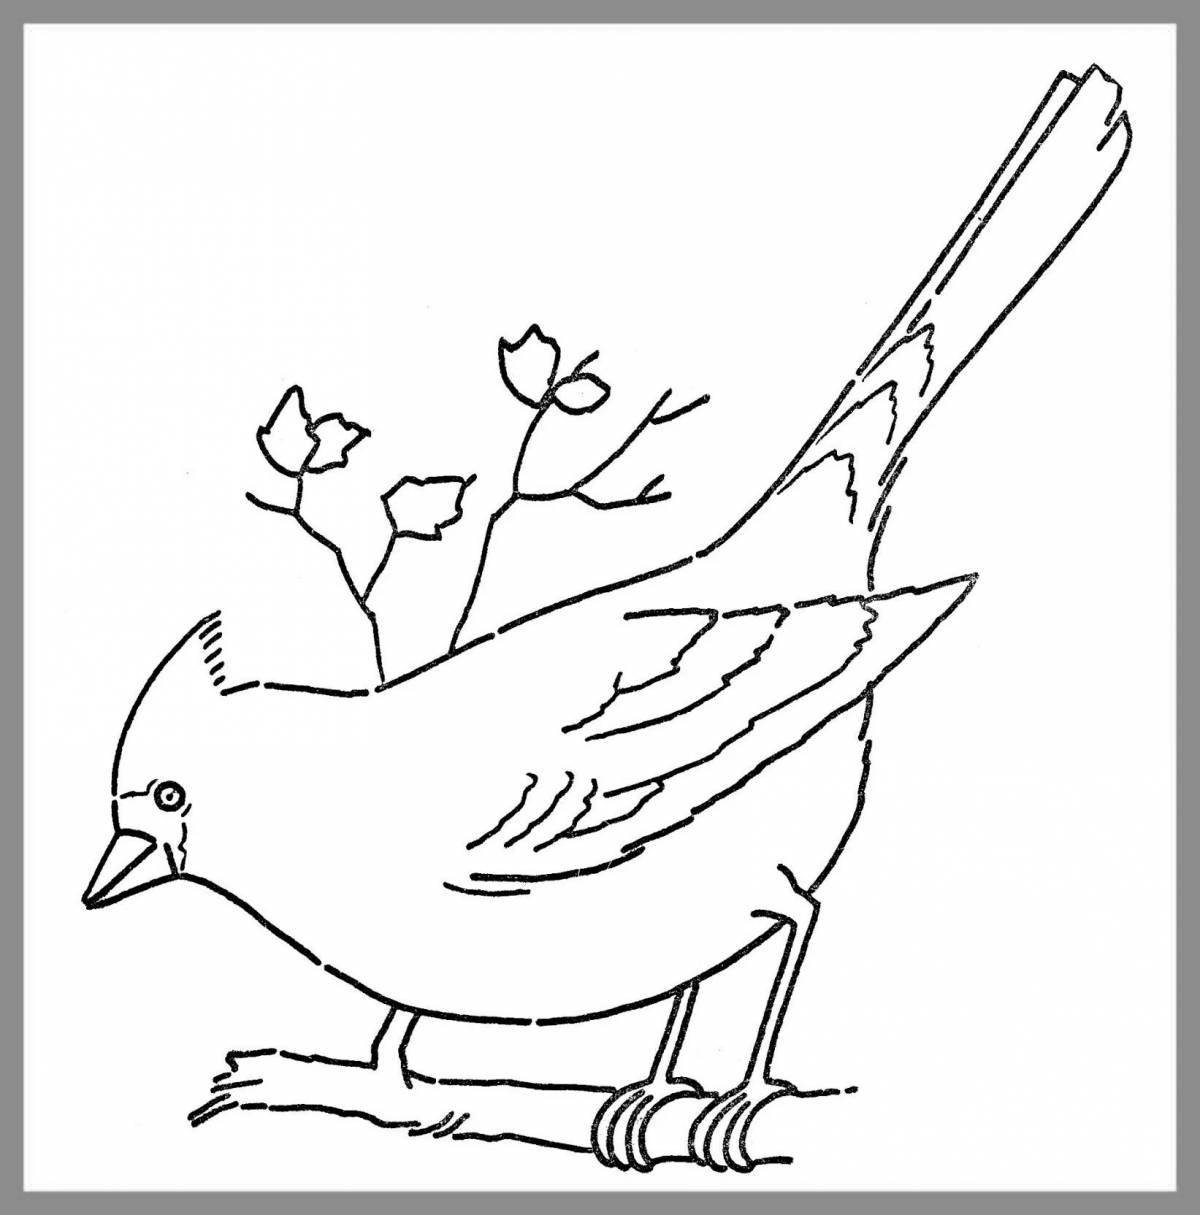 Amazing waxwing coloring page for kids